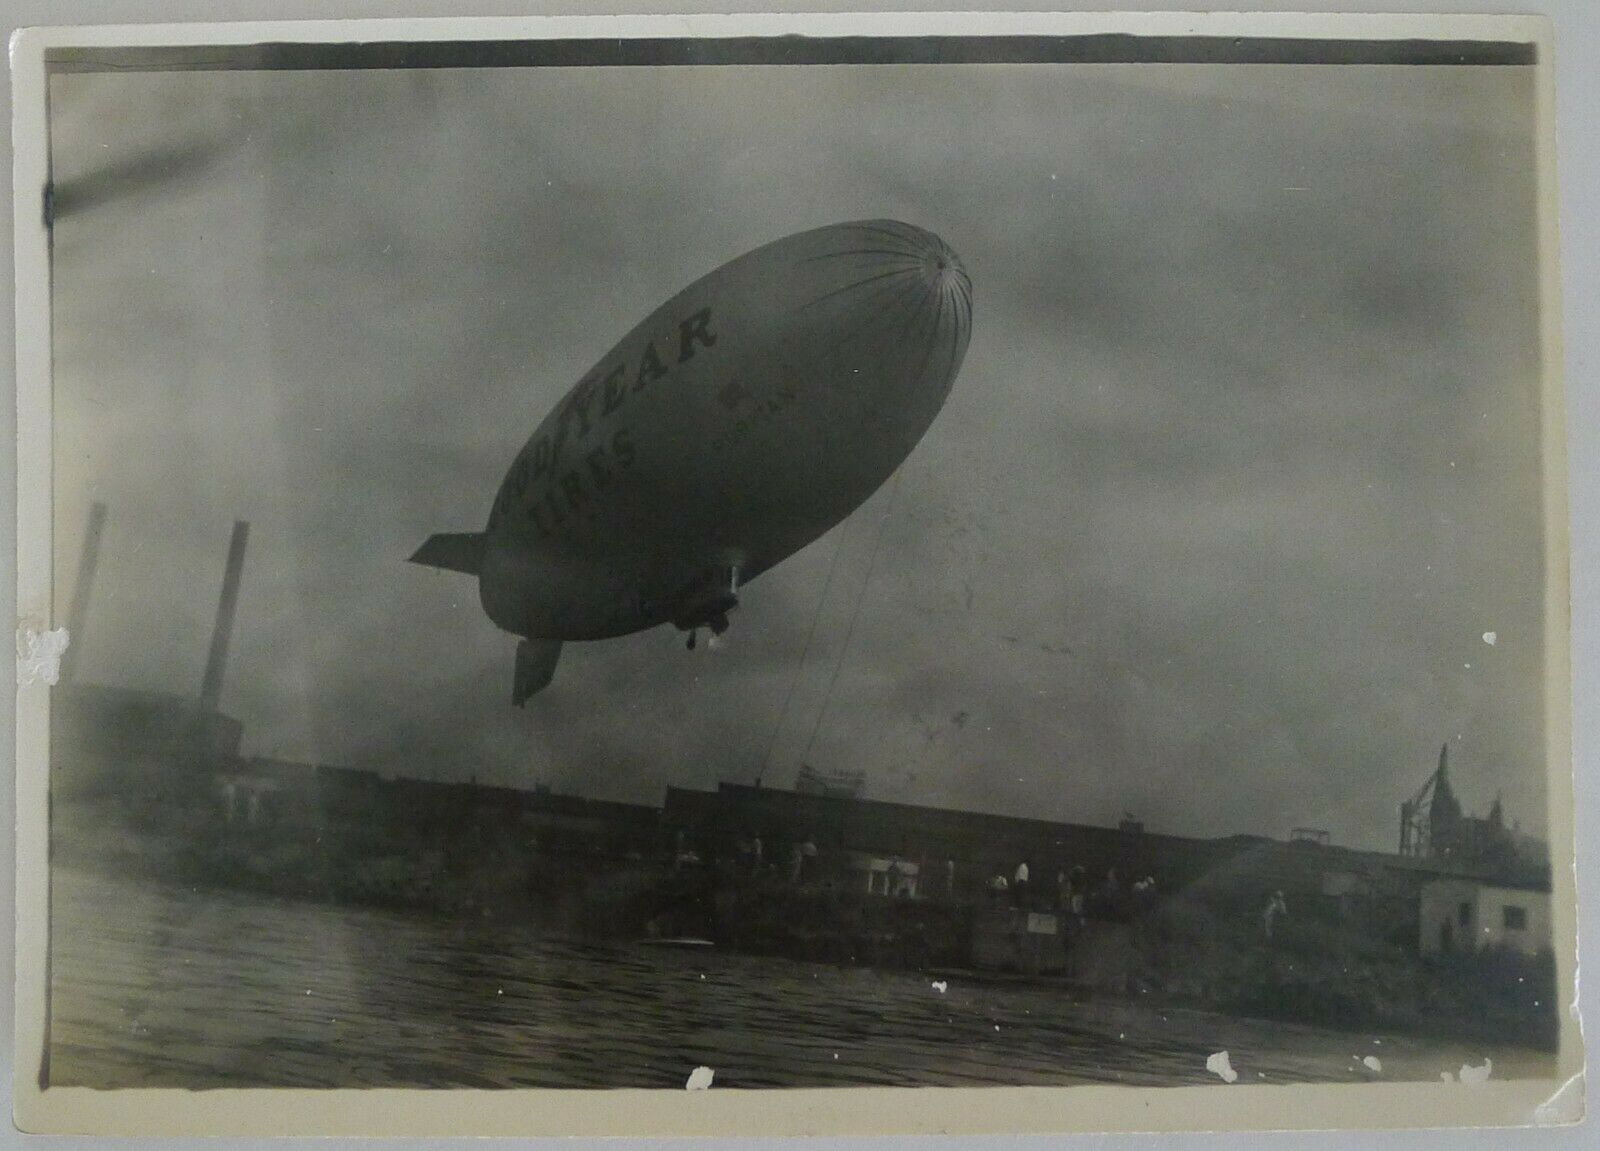 Goodyear Blimp Puritan Photo And Other Related Photos